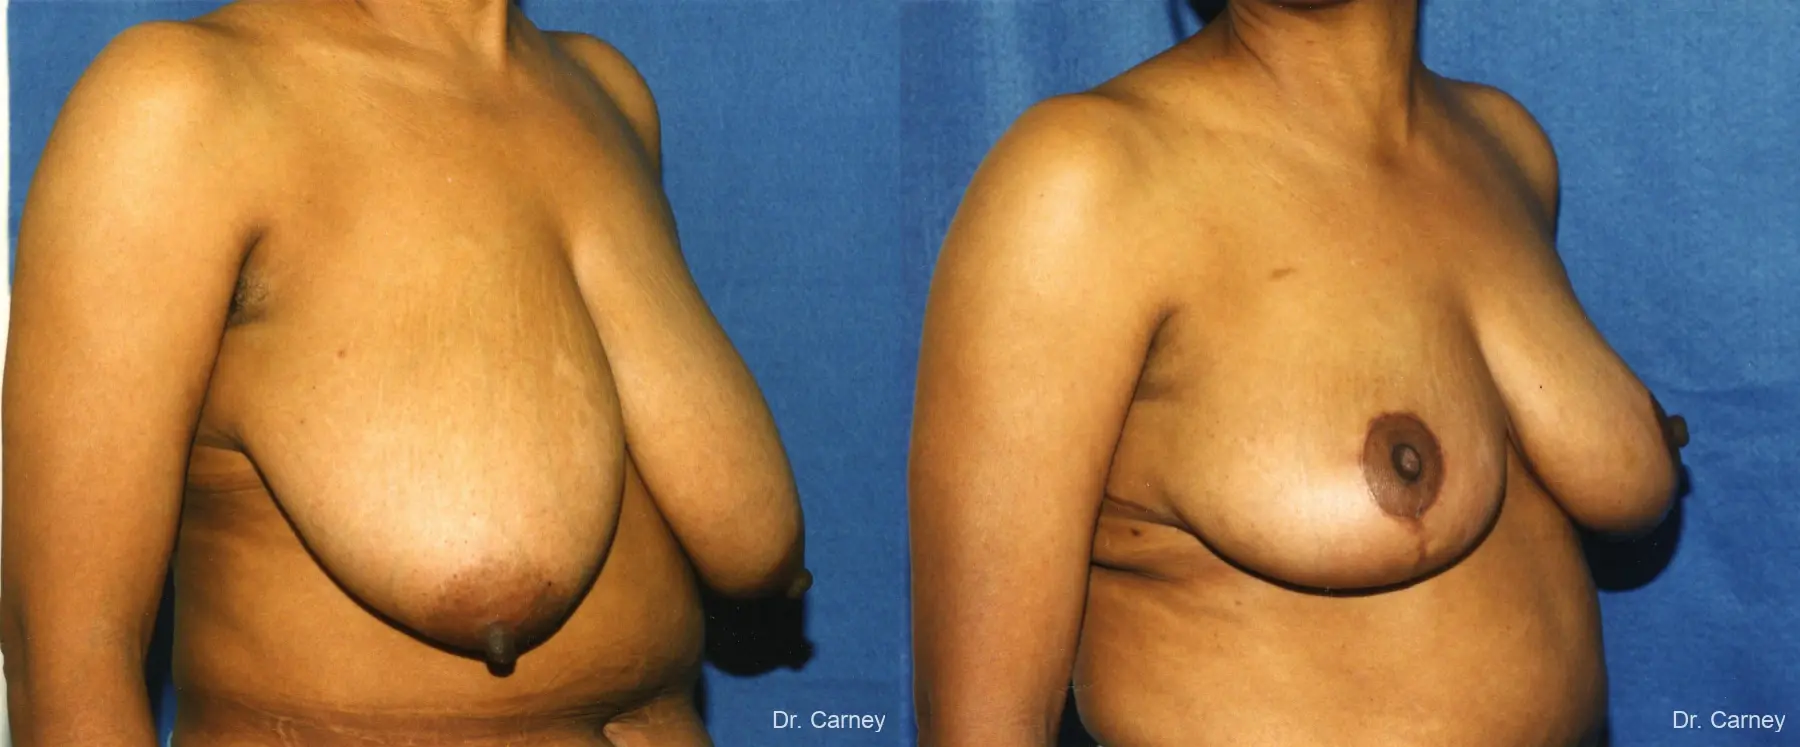 Virginia Beach Breast Reduction 1228. - Before and After 2